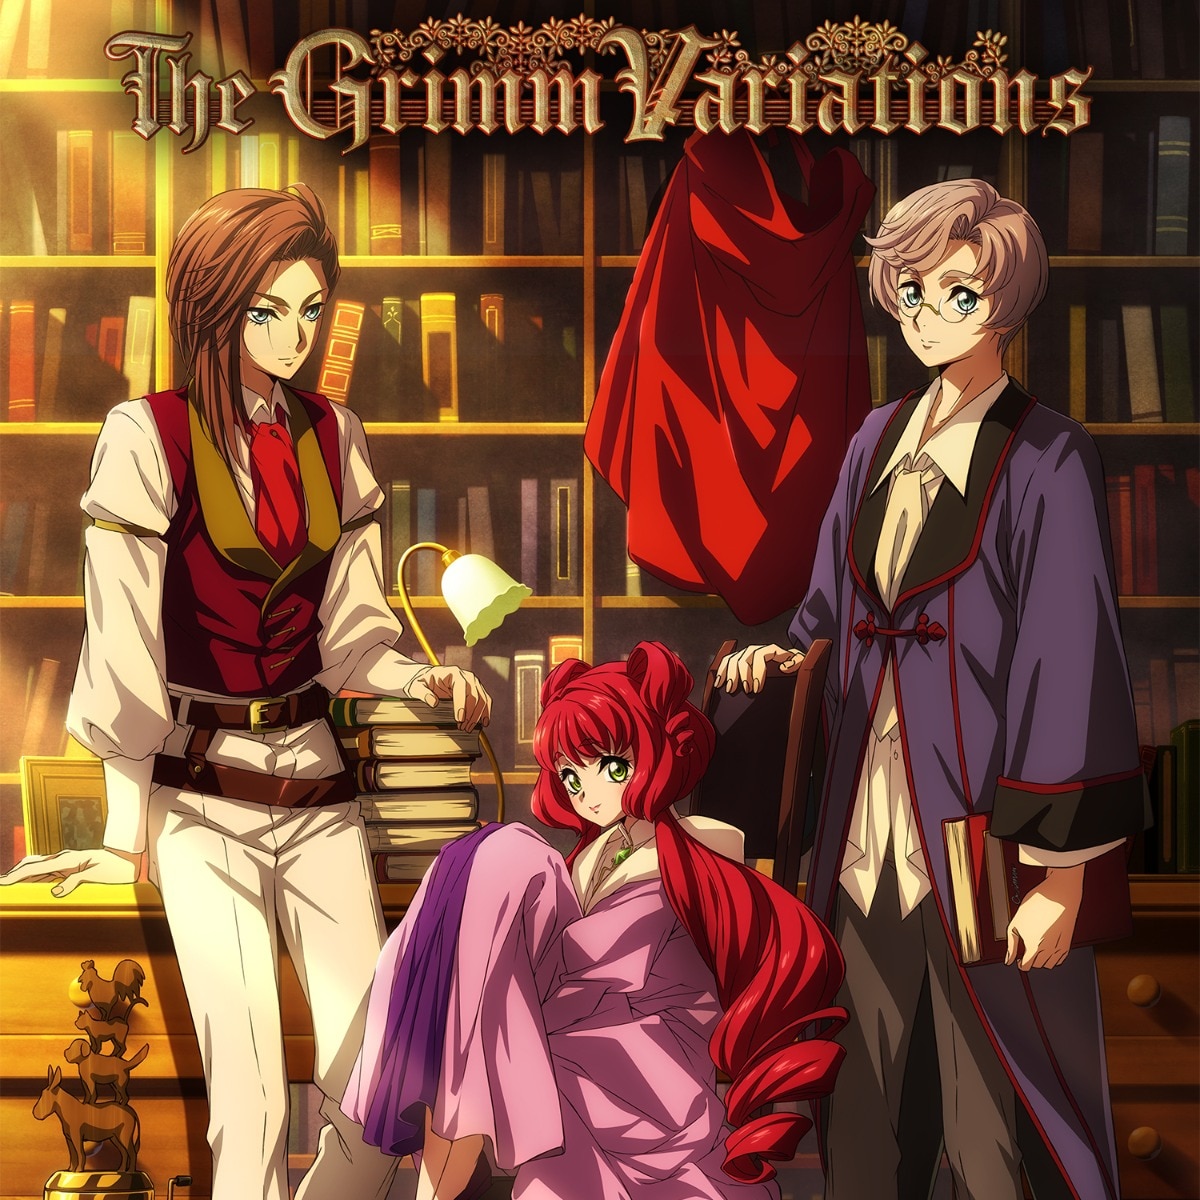 The Grimm Variations review